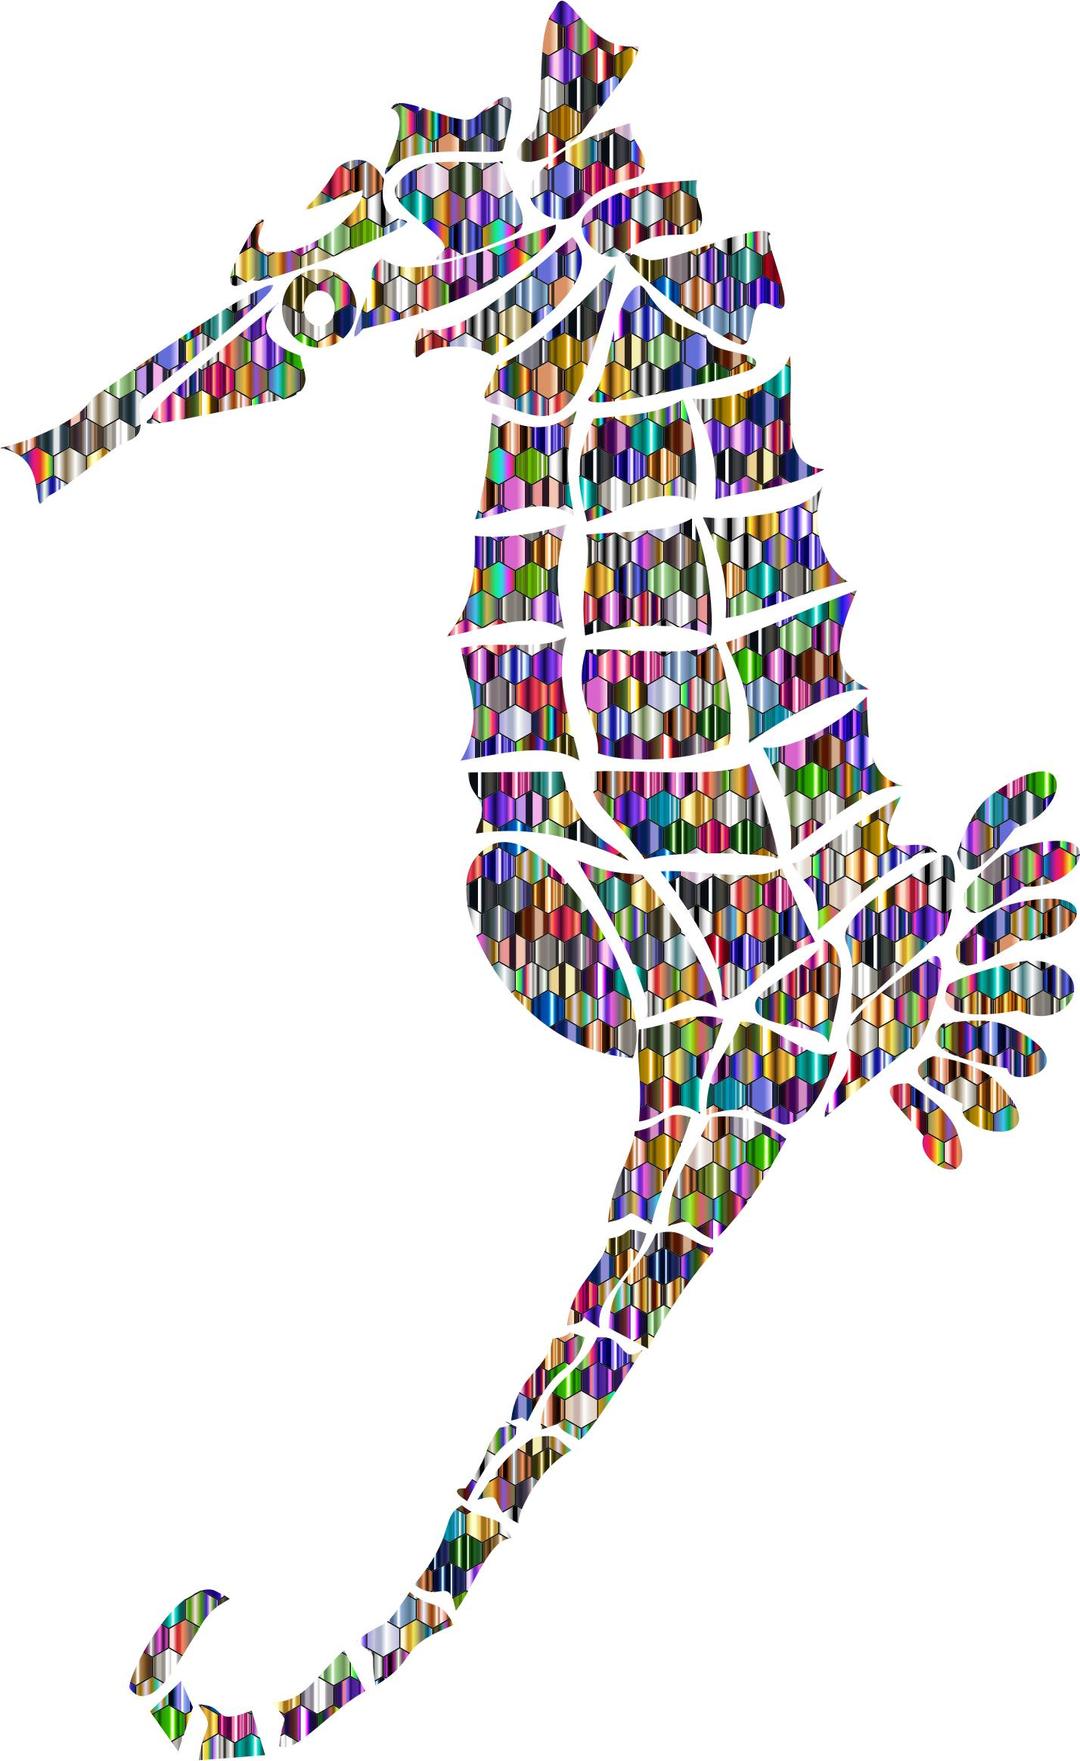 Reflective Iridescent Scales Stylized Seahorse Silhouette png transparent